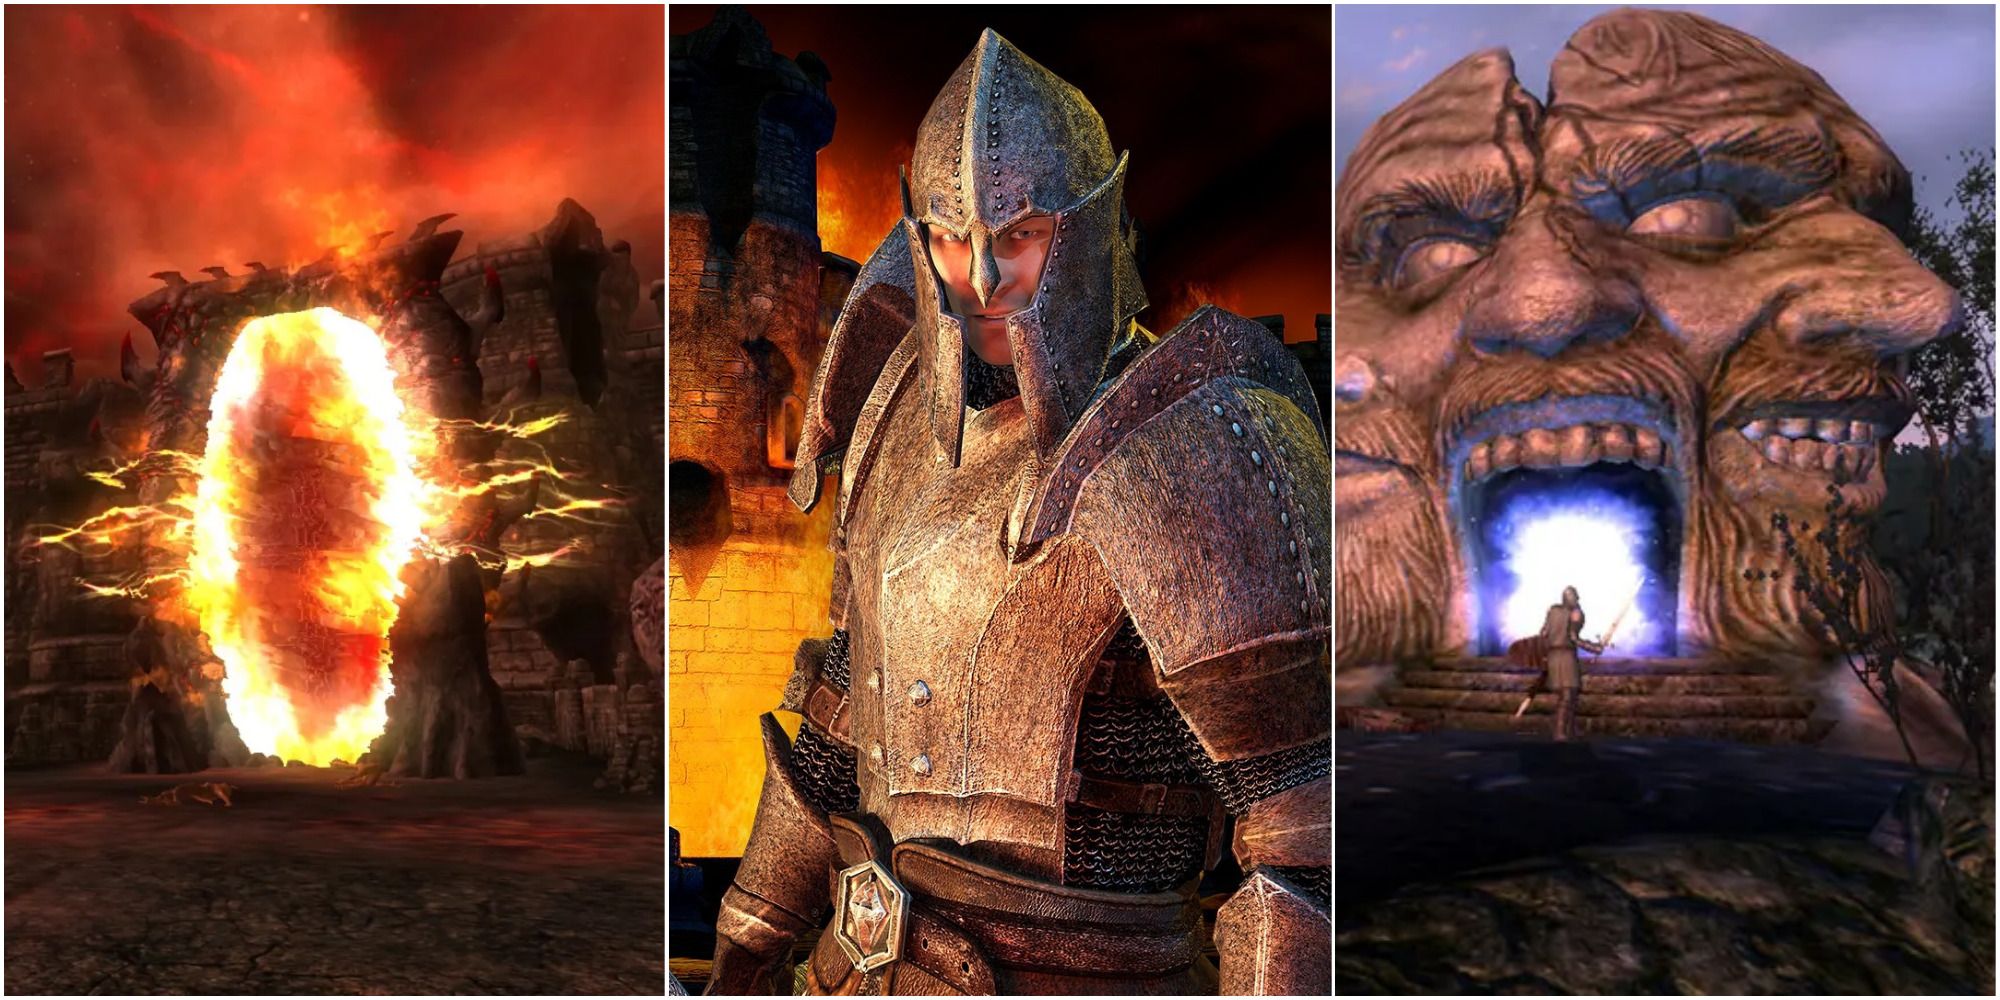 A collage of images from The Elder Scrolls IV: Oblivion